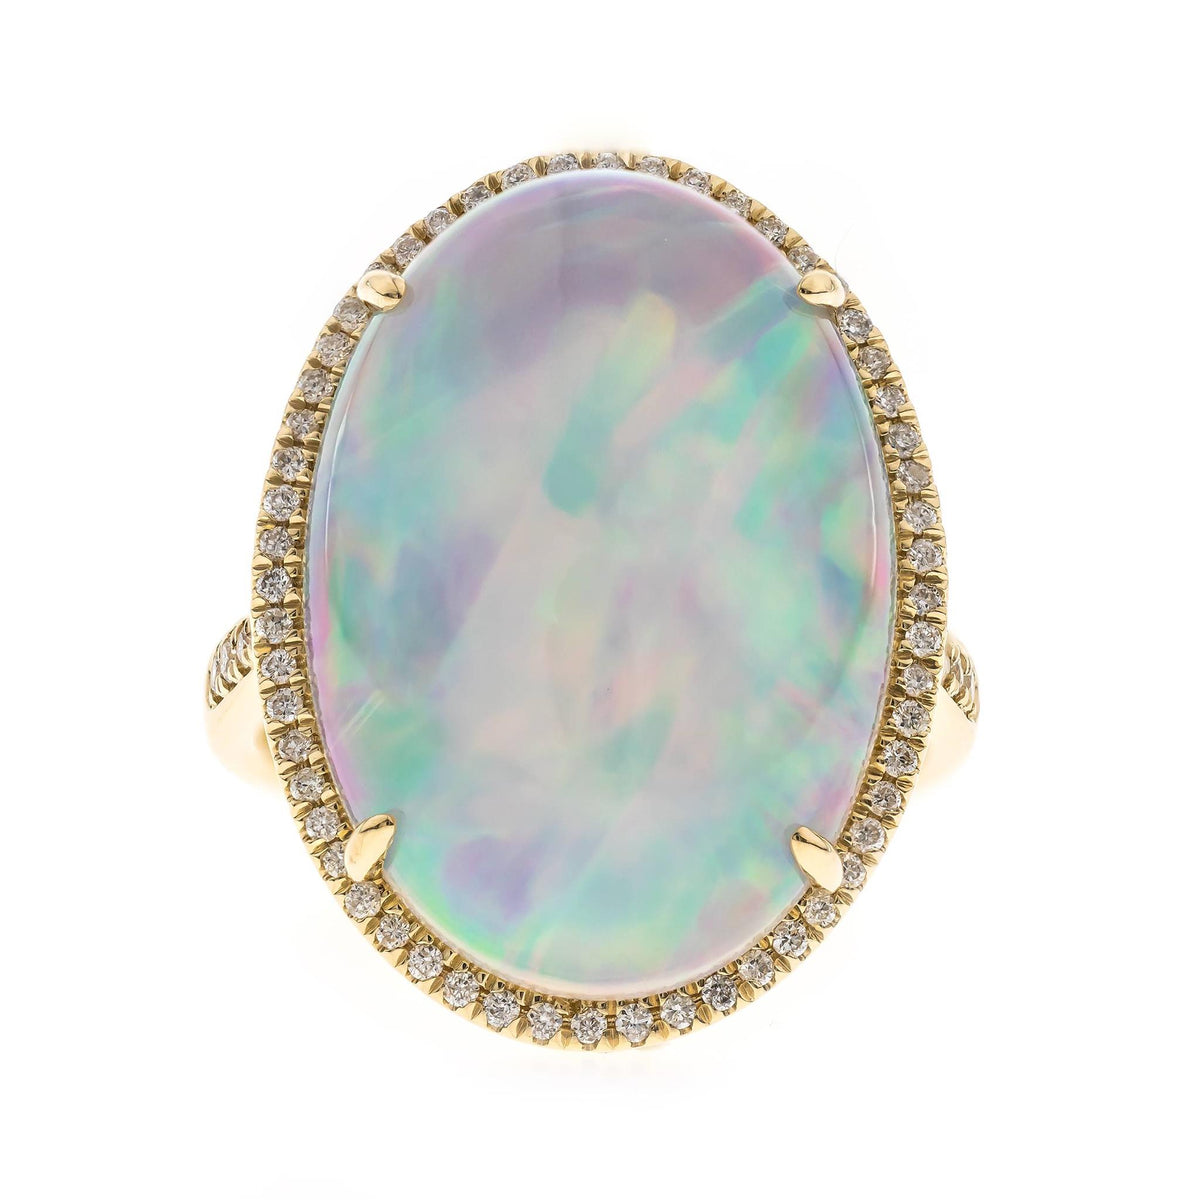 14Kt Yellow Gold Halo Gemstone Ring with 7.62ct Ethiopian Opal and Natural Diamonds